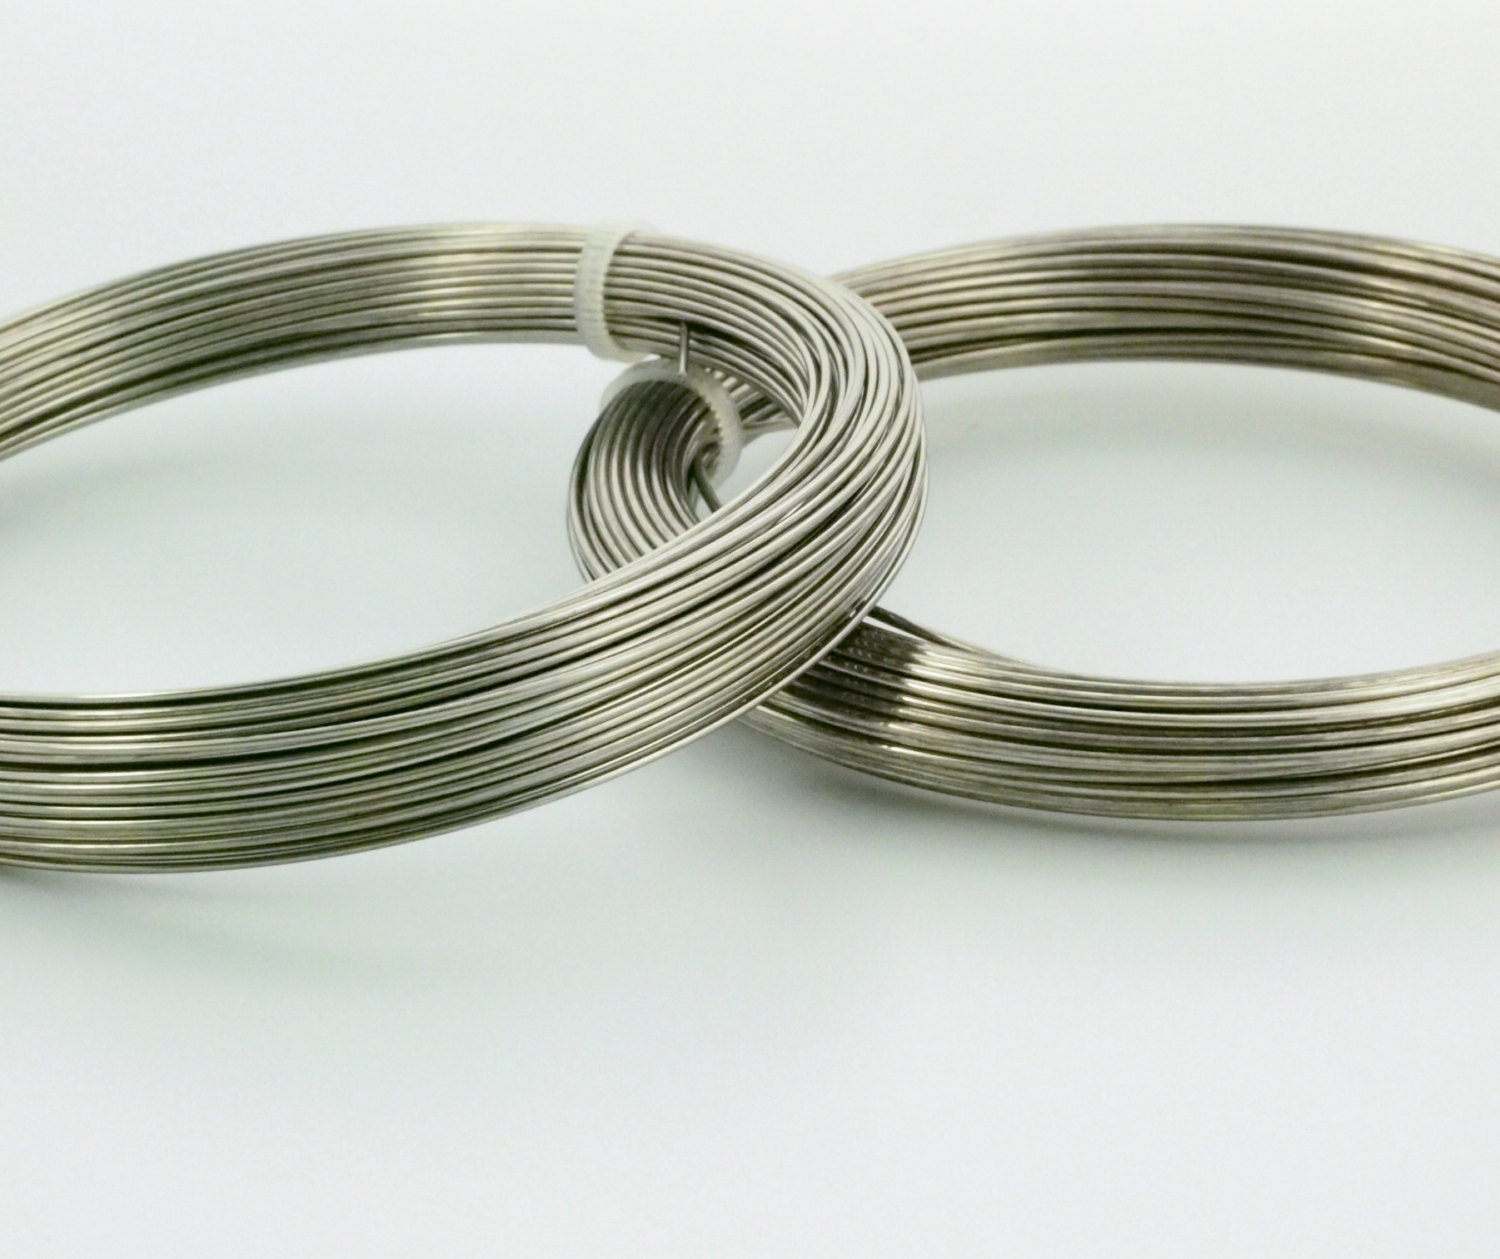 Craft Wire, 316 Stainless Steel Double Helix Twisted Wire, Rigid Crafting  Wire, 5 Pack, Crafting Wire, DIY, Heavy Duty, Metal, Wire, Crafts 